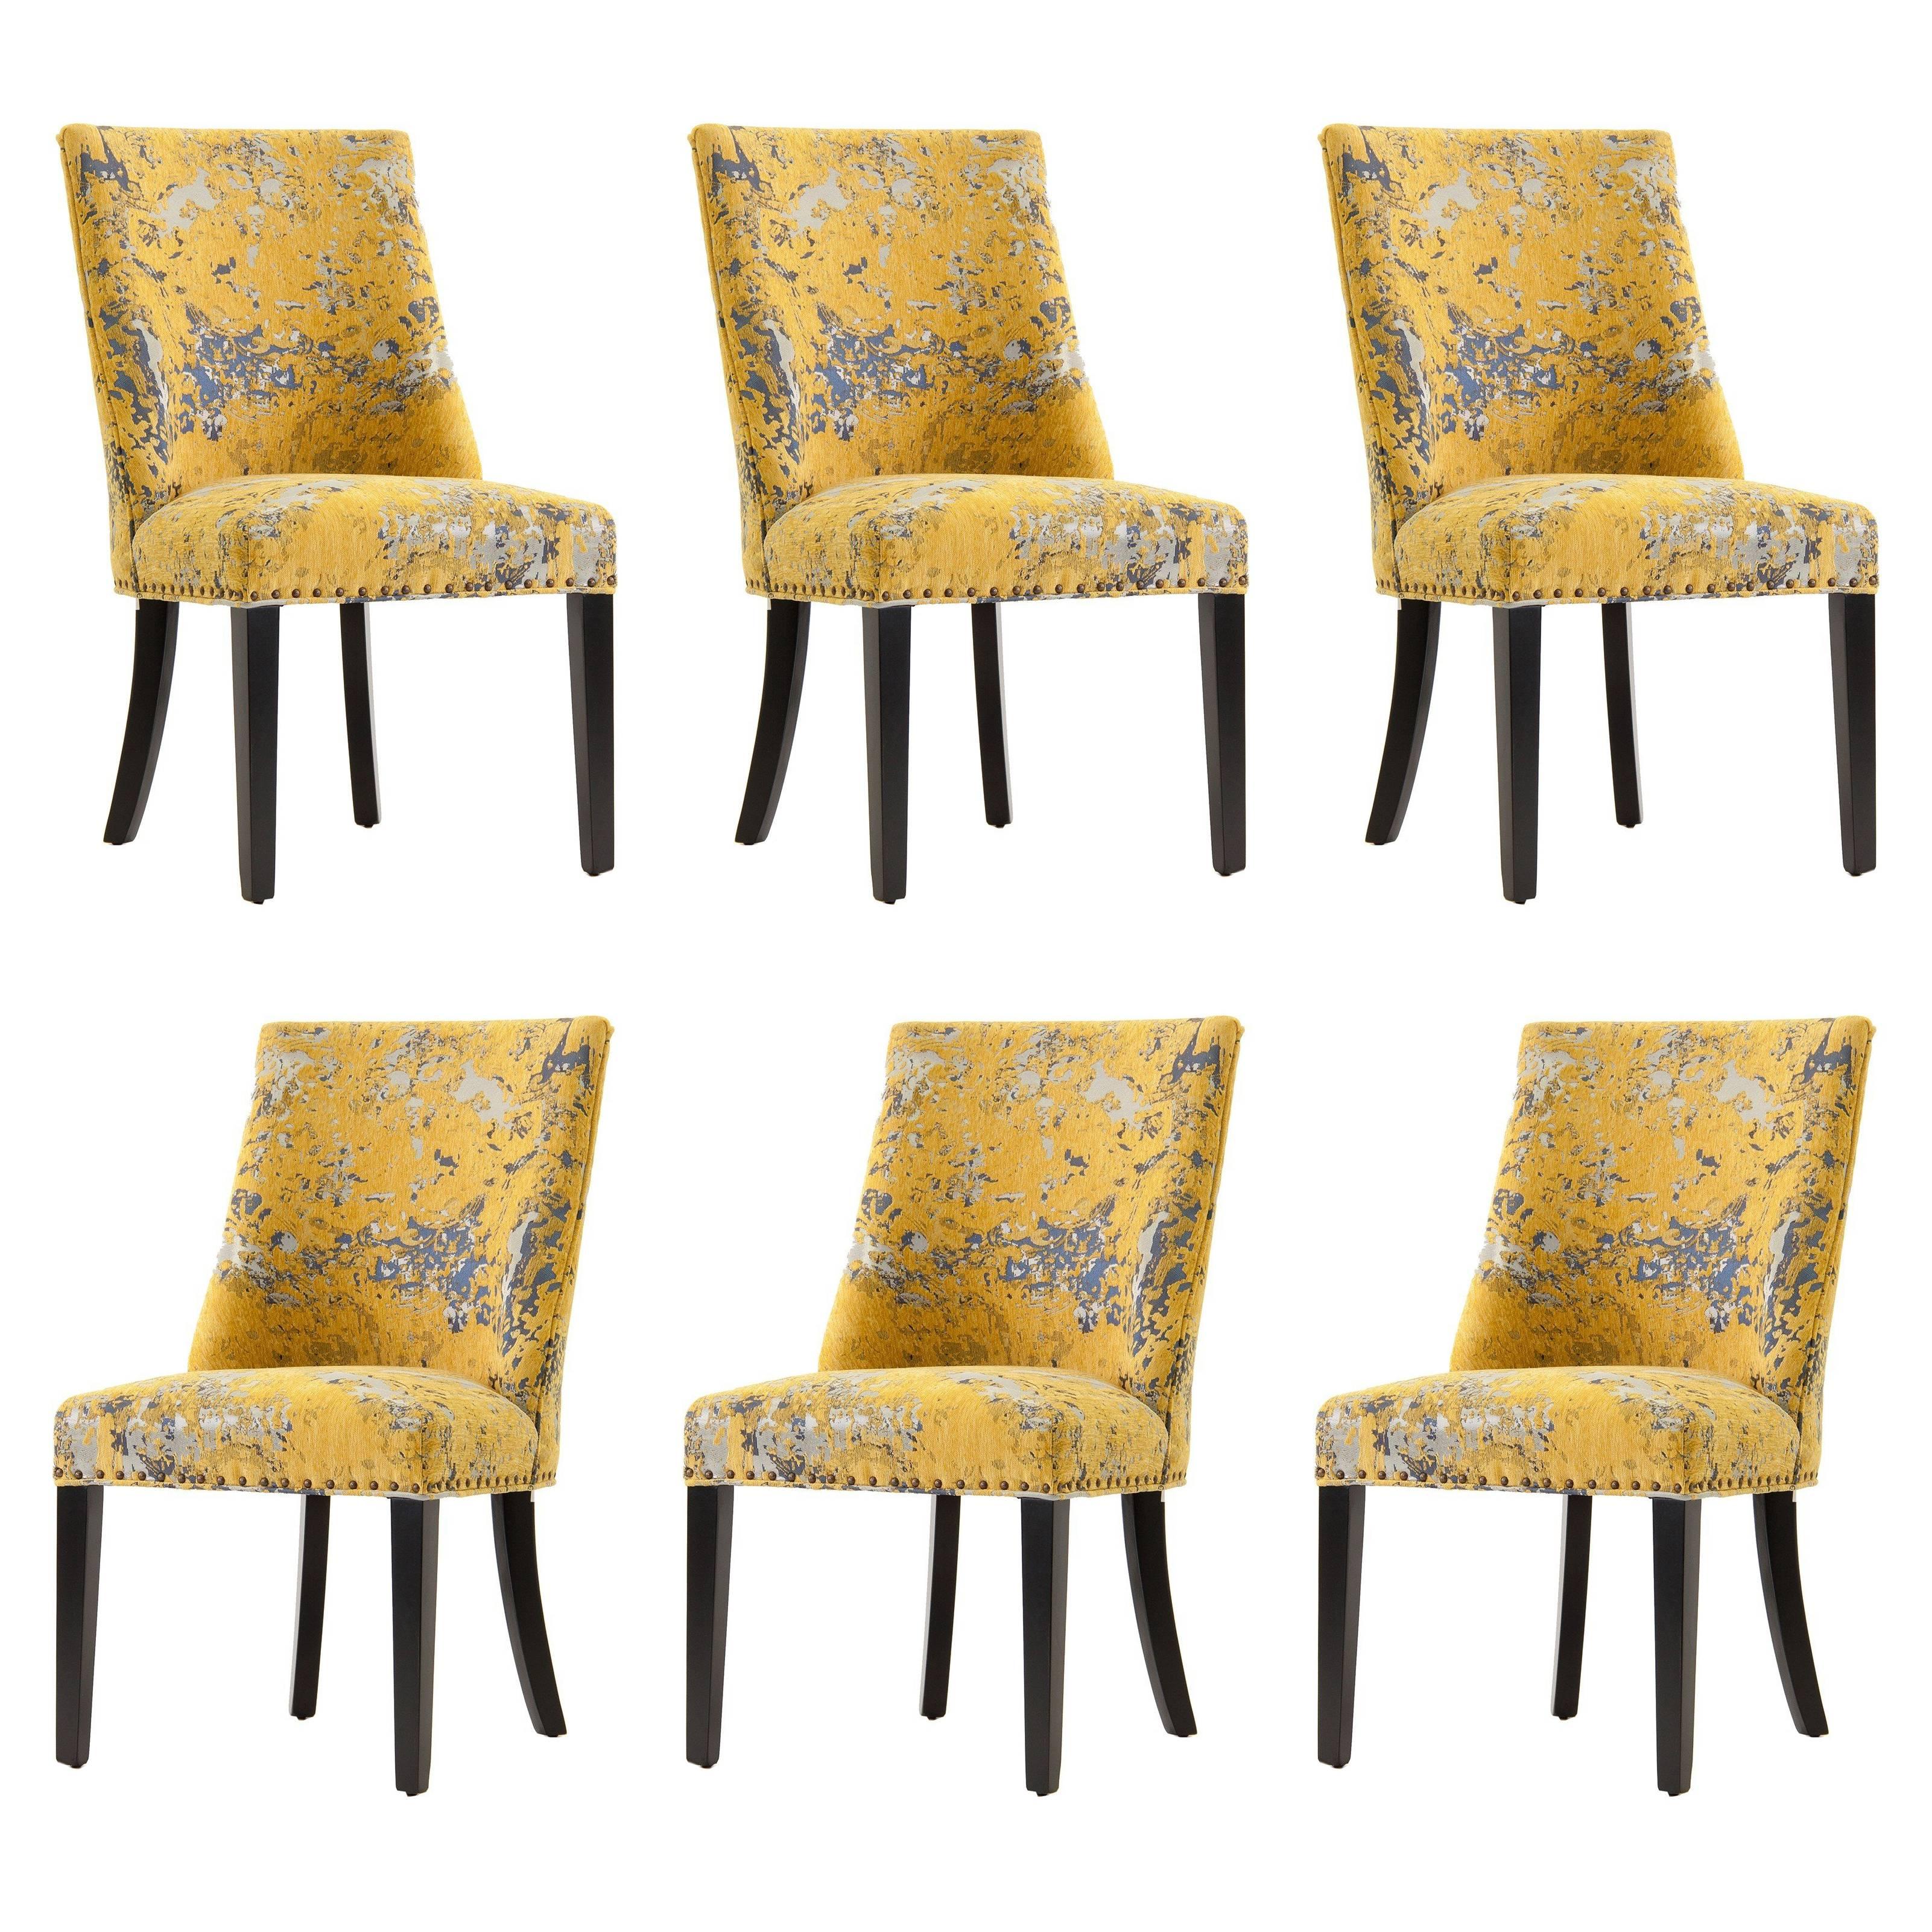 Set of Six Elegant and Original Dining Chairs